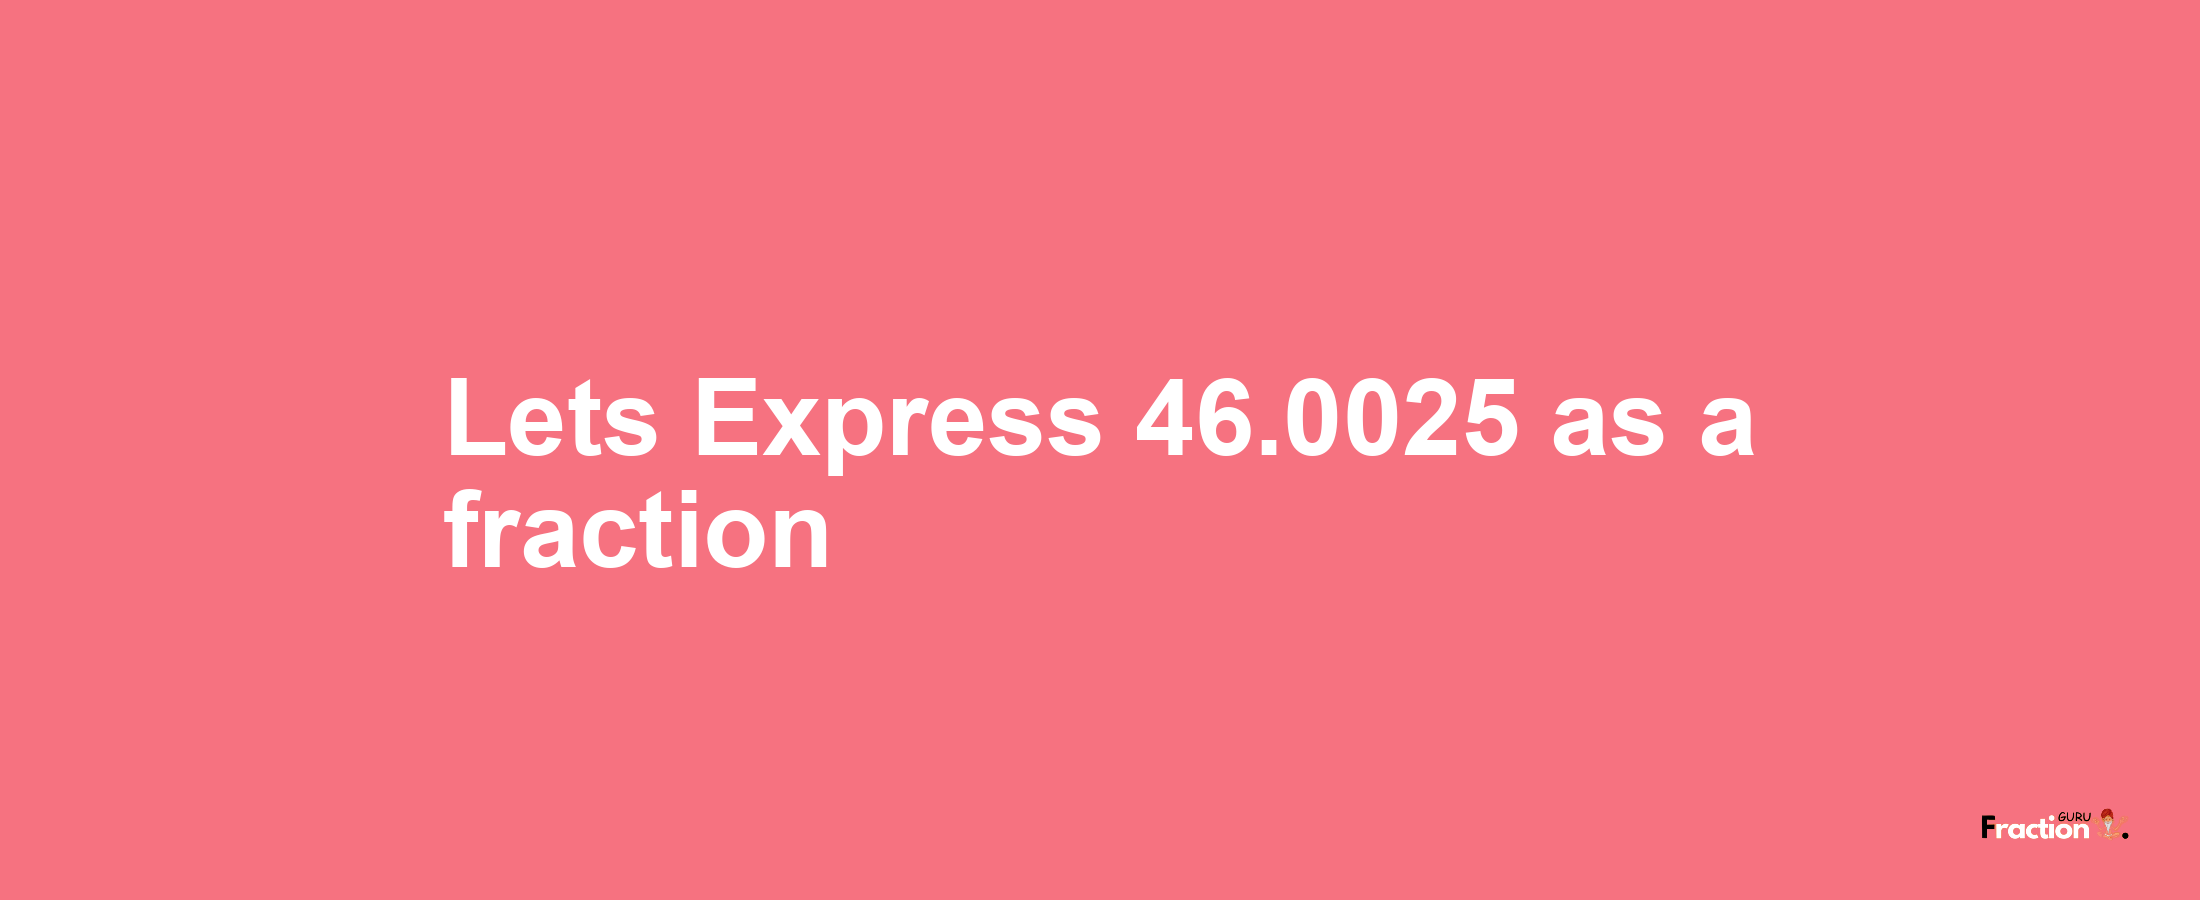 Lets Express 46.0025 as afraction